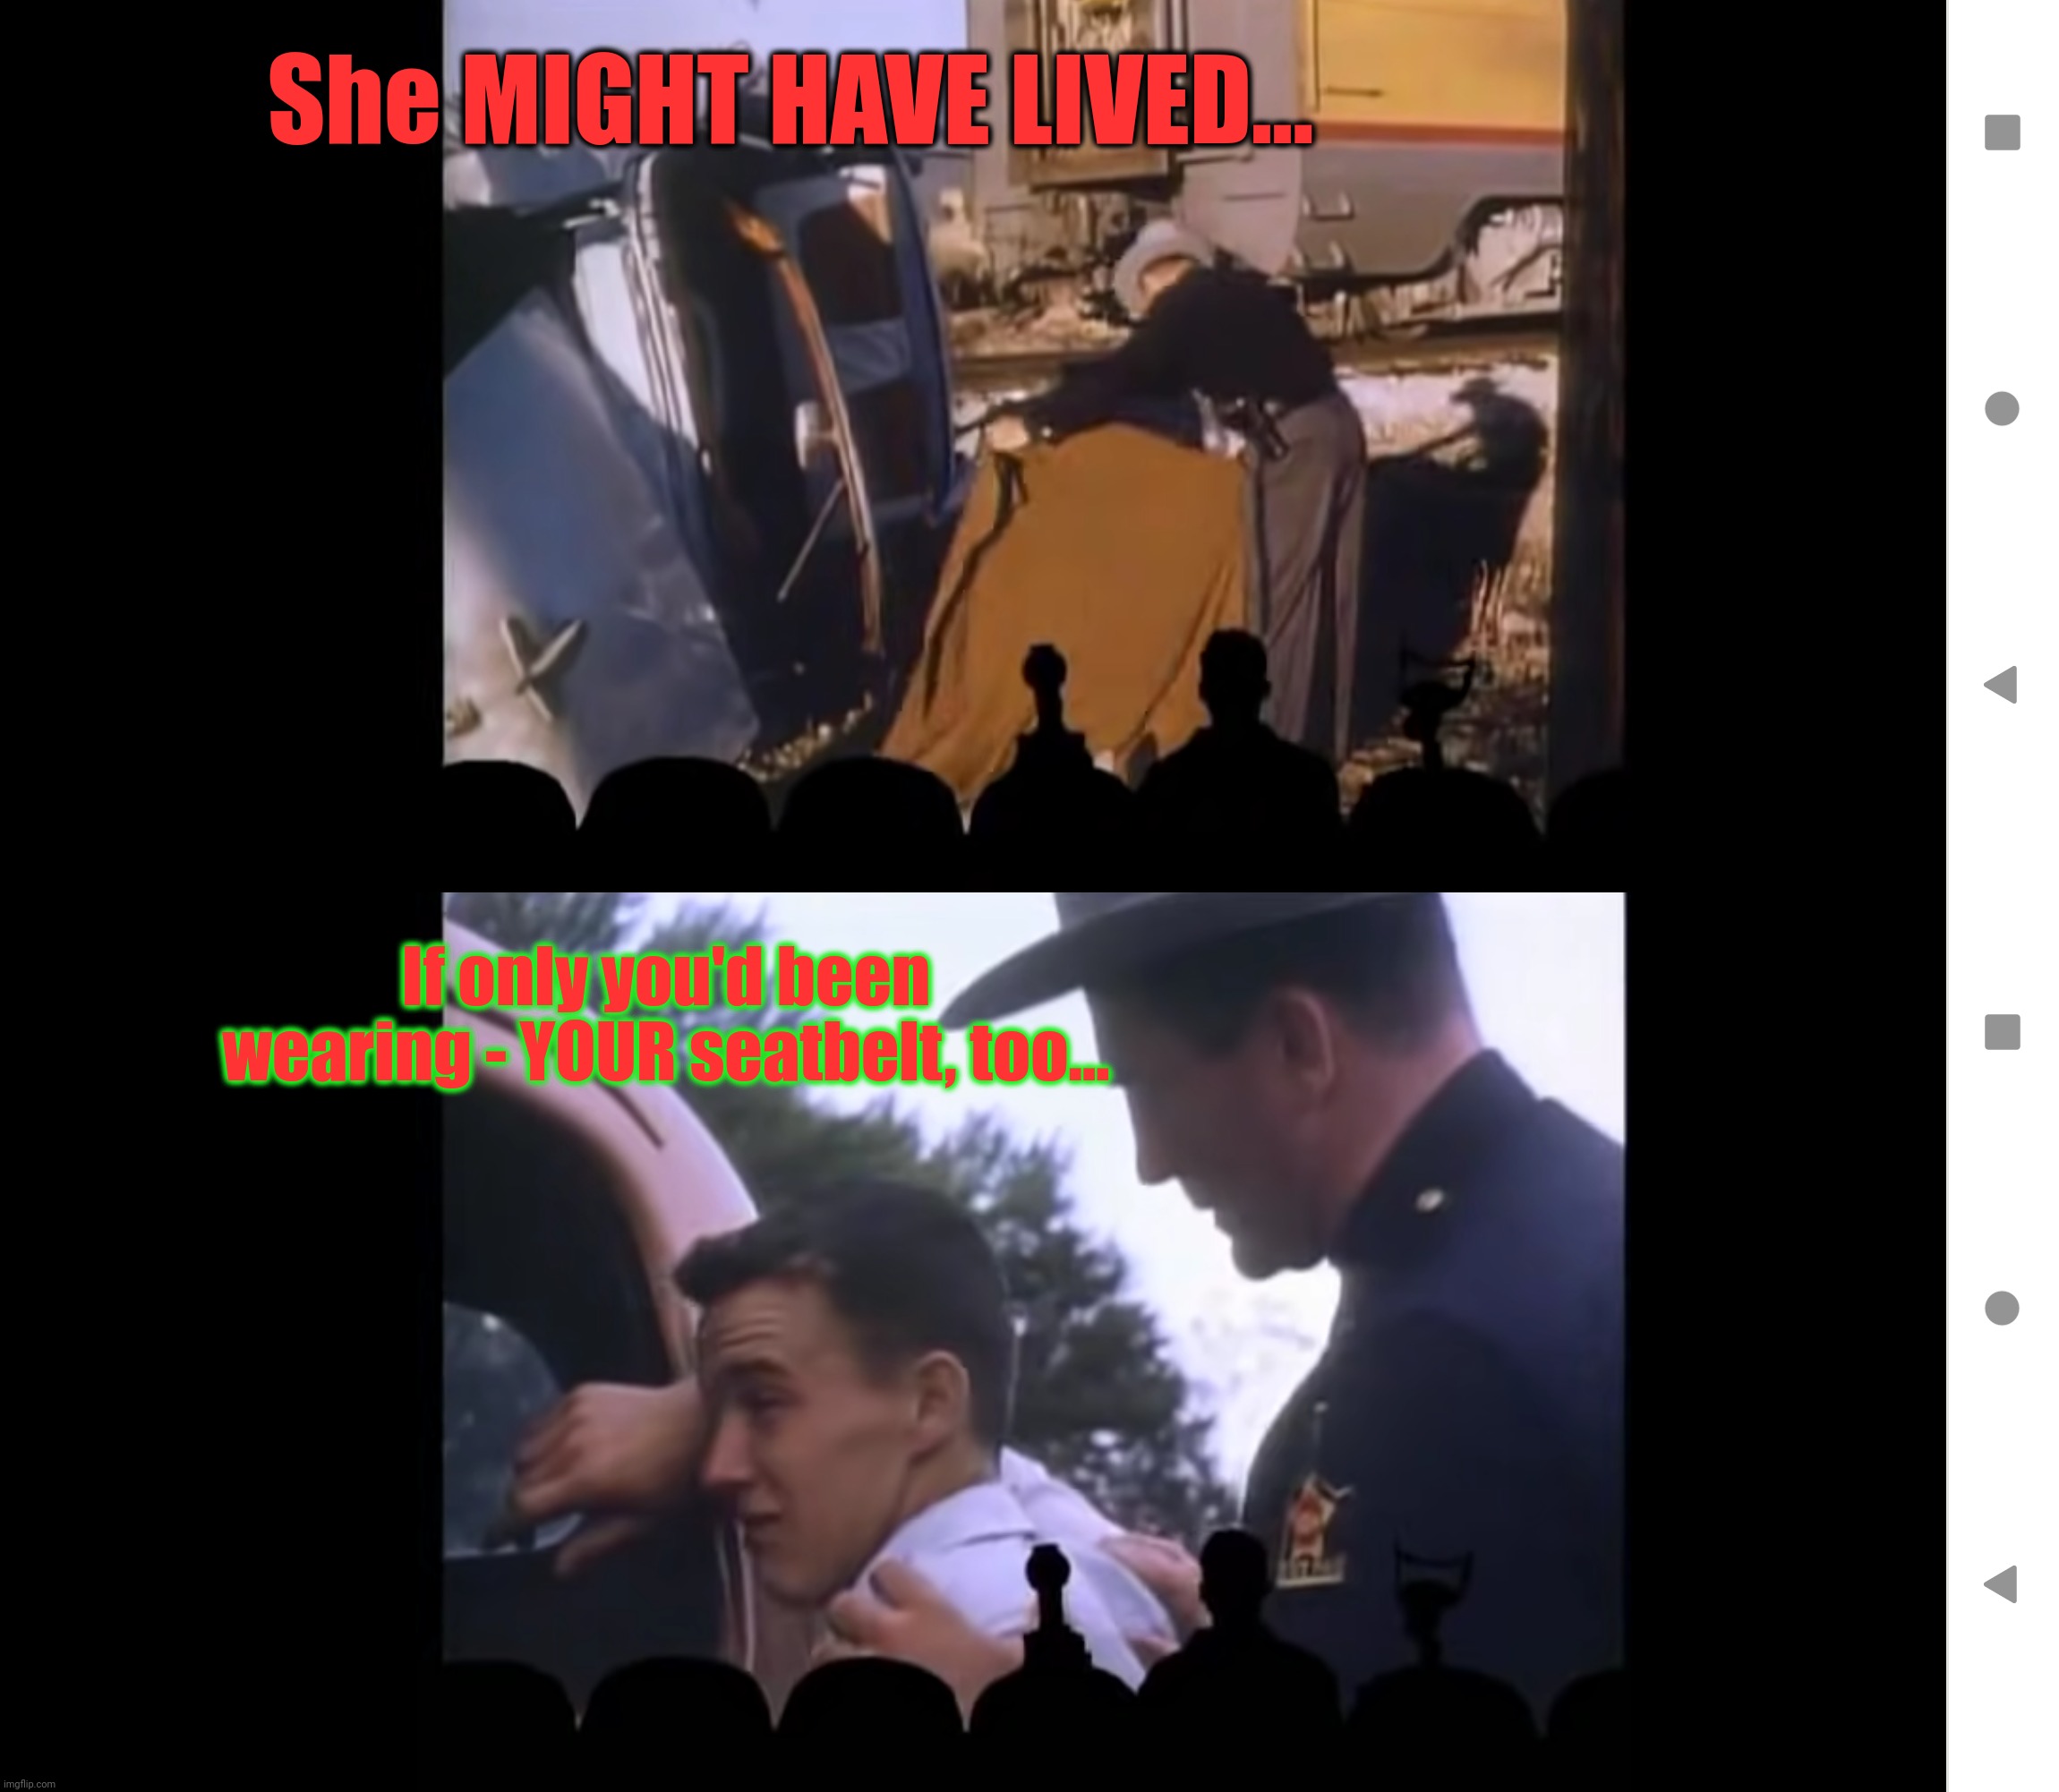 "Why don't they [Jab]?" A safety message from MST3K |  She MIGHT HAVE LIVED... If only you'd been wearing - YOUR seatbelt, too... | image tagged in why don't they look,mst3k,bad analogies,covid_truth memes,put your seatbelt on or mine won't work,another vaccine failure | made w/ Imgflip meme maker